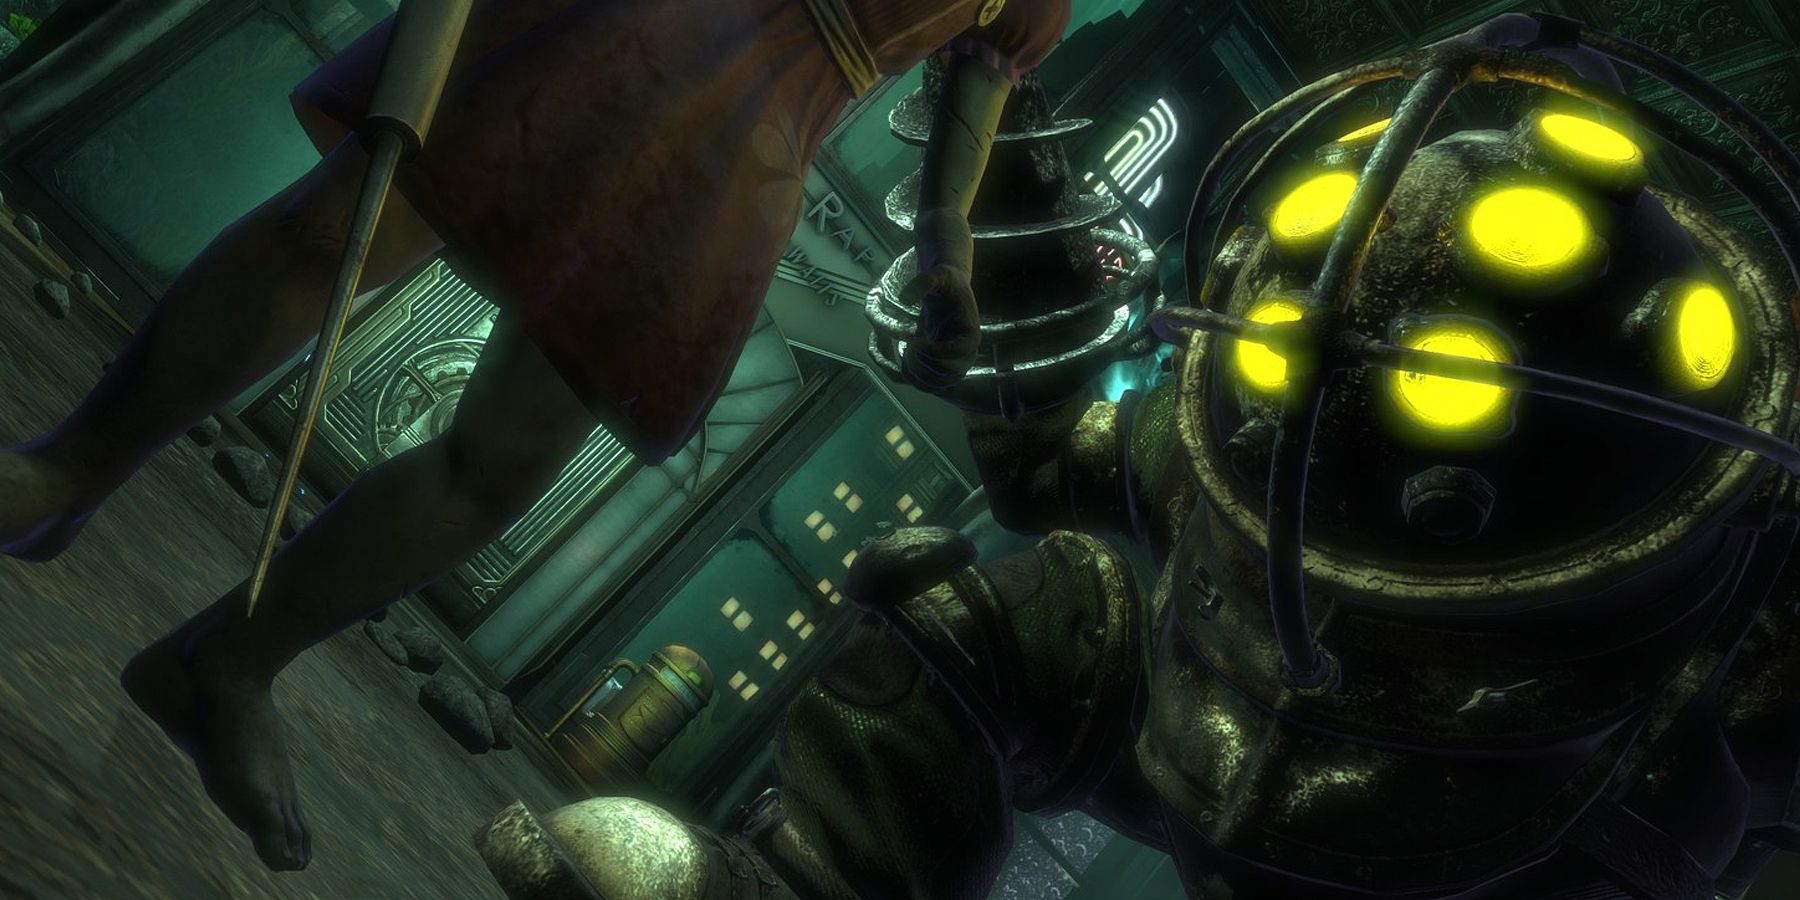 Big Daddy and Little Sister examining the player in BioShock